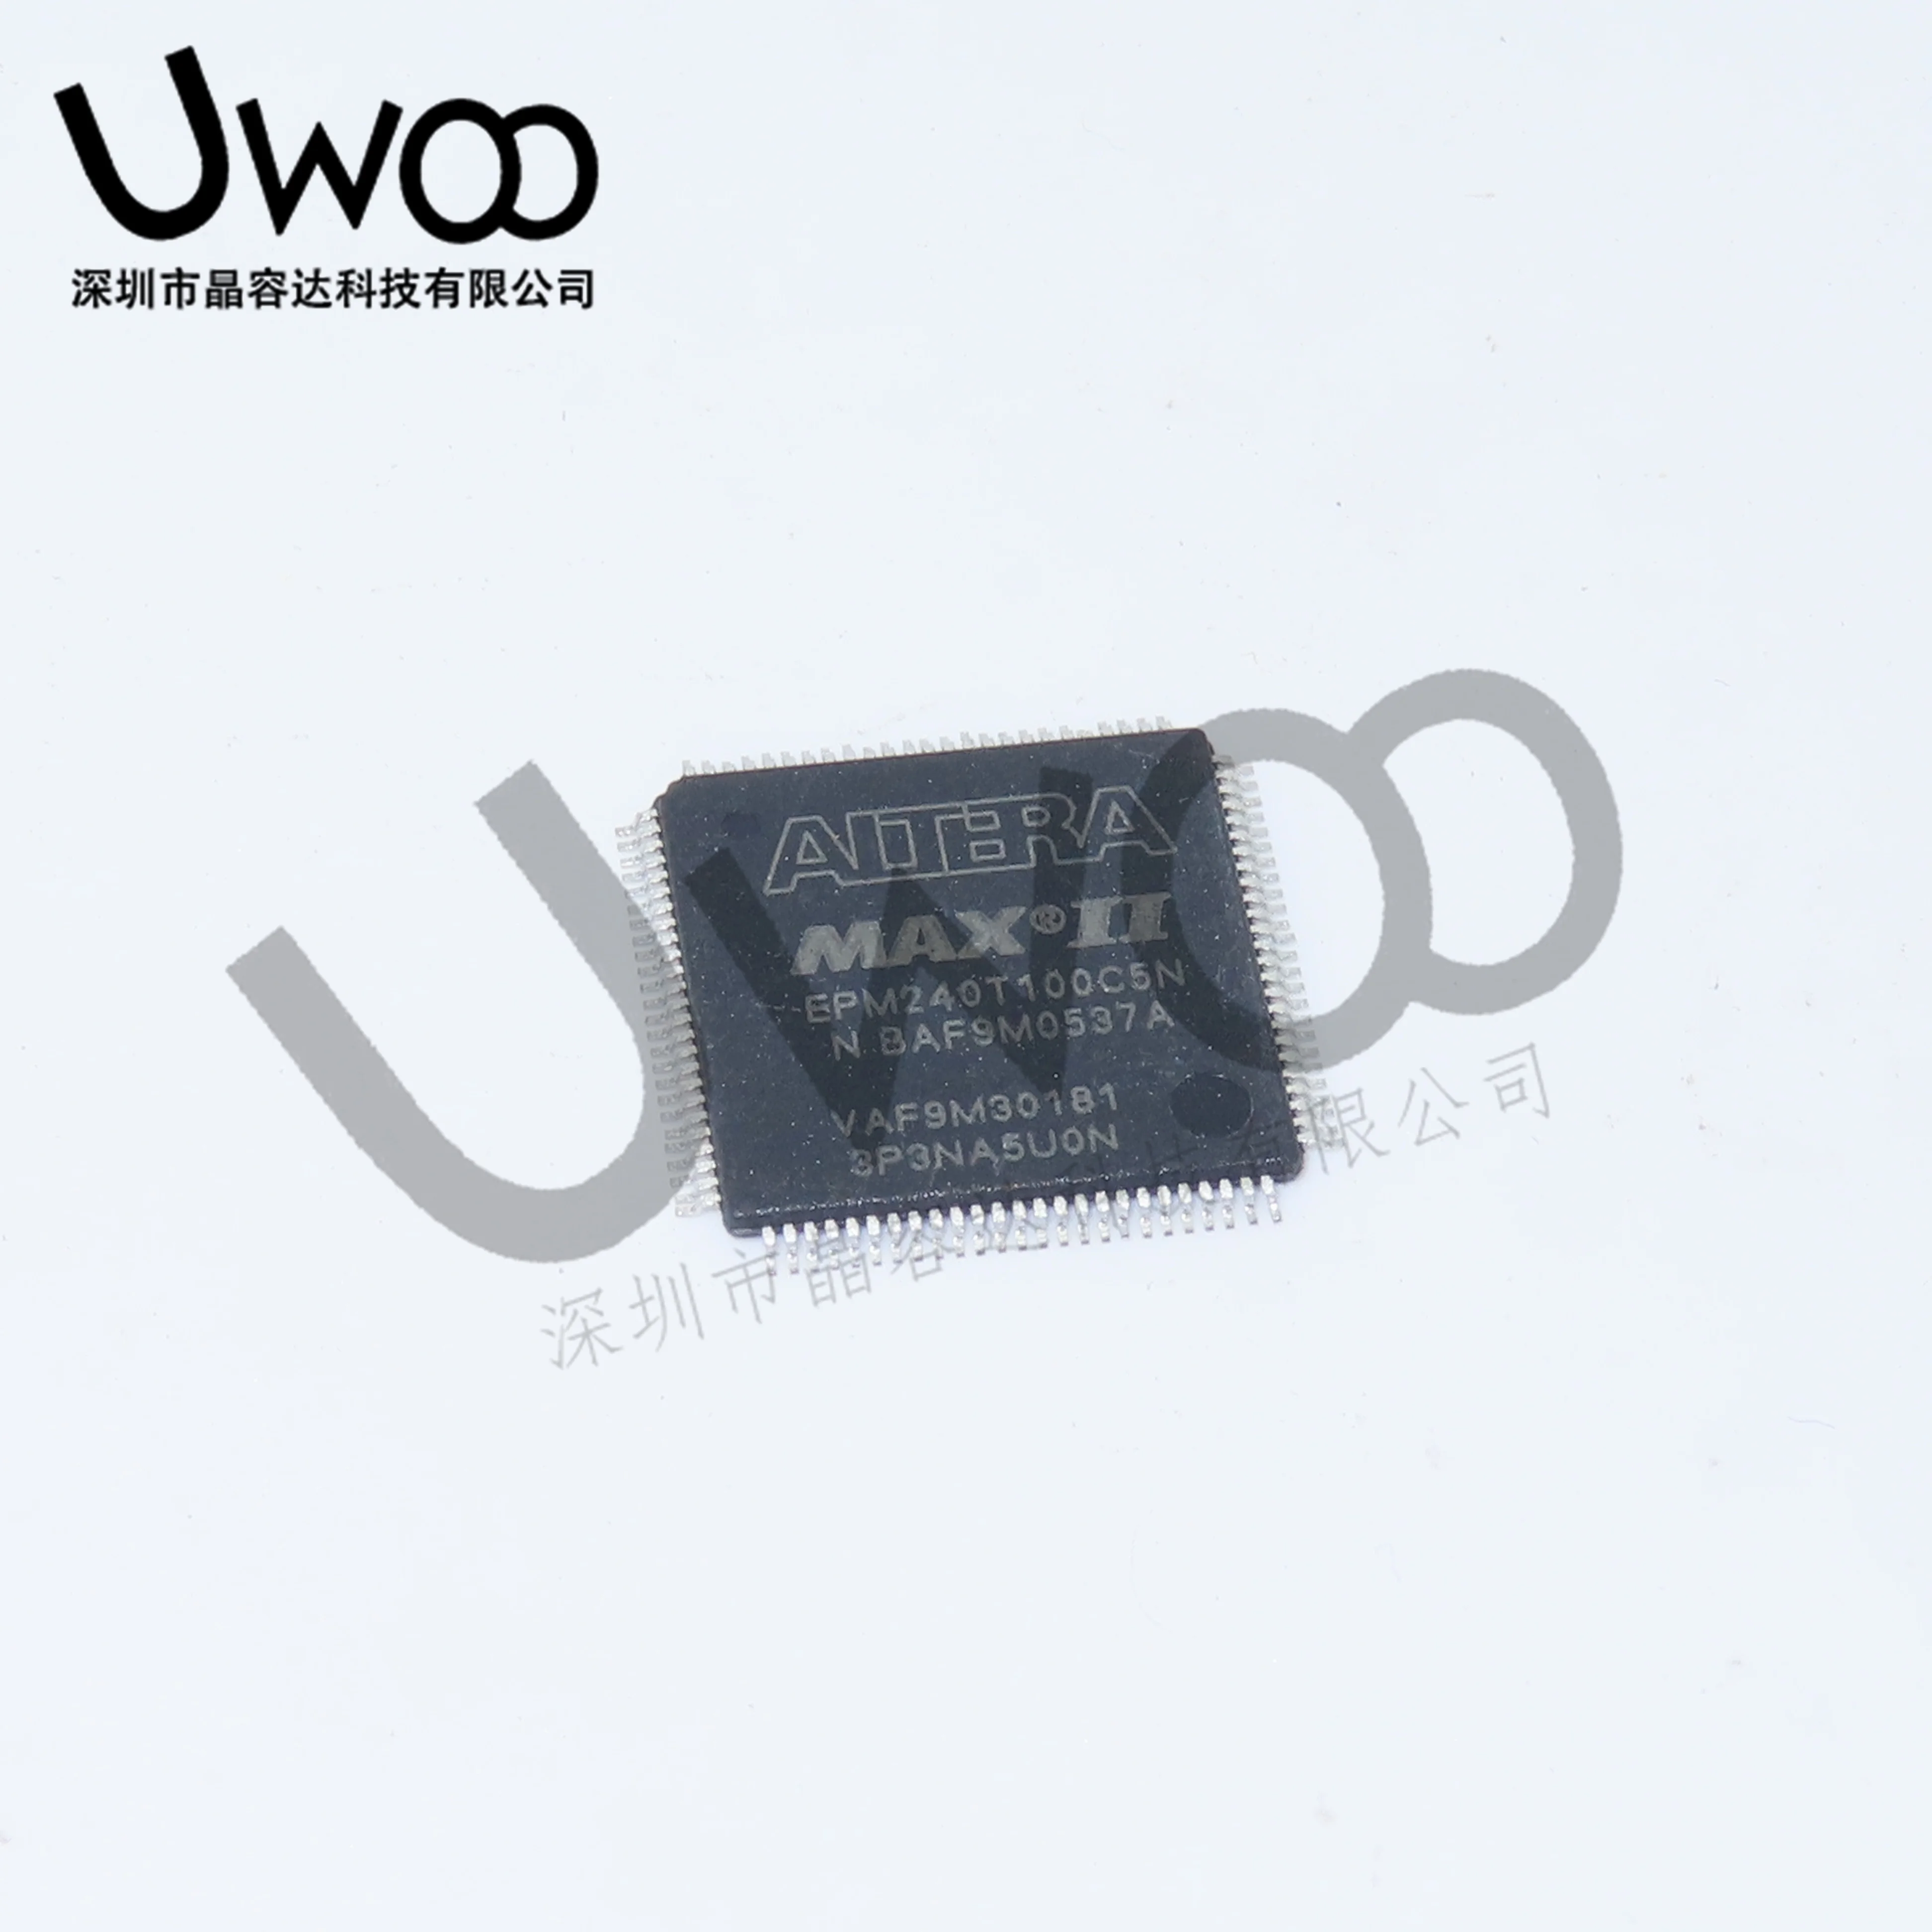 

100%Original New EPM240T100C5N CPLD Complex Programmable Logic Device CPLD-MAX II ROHS PSE KC